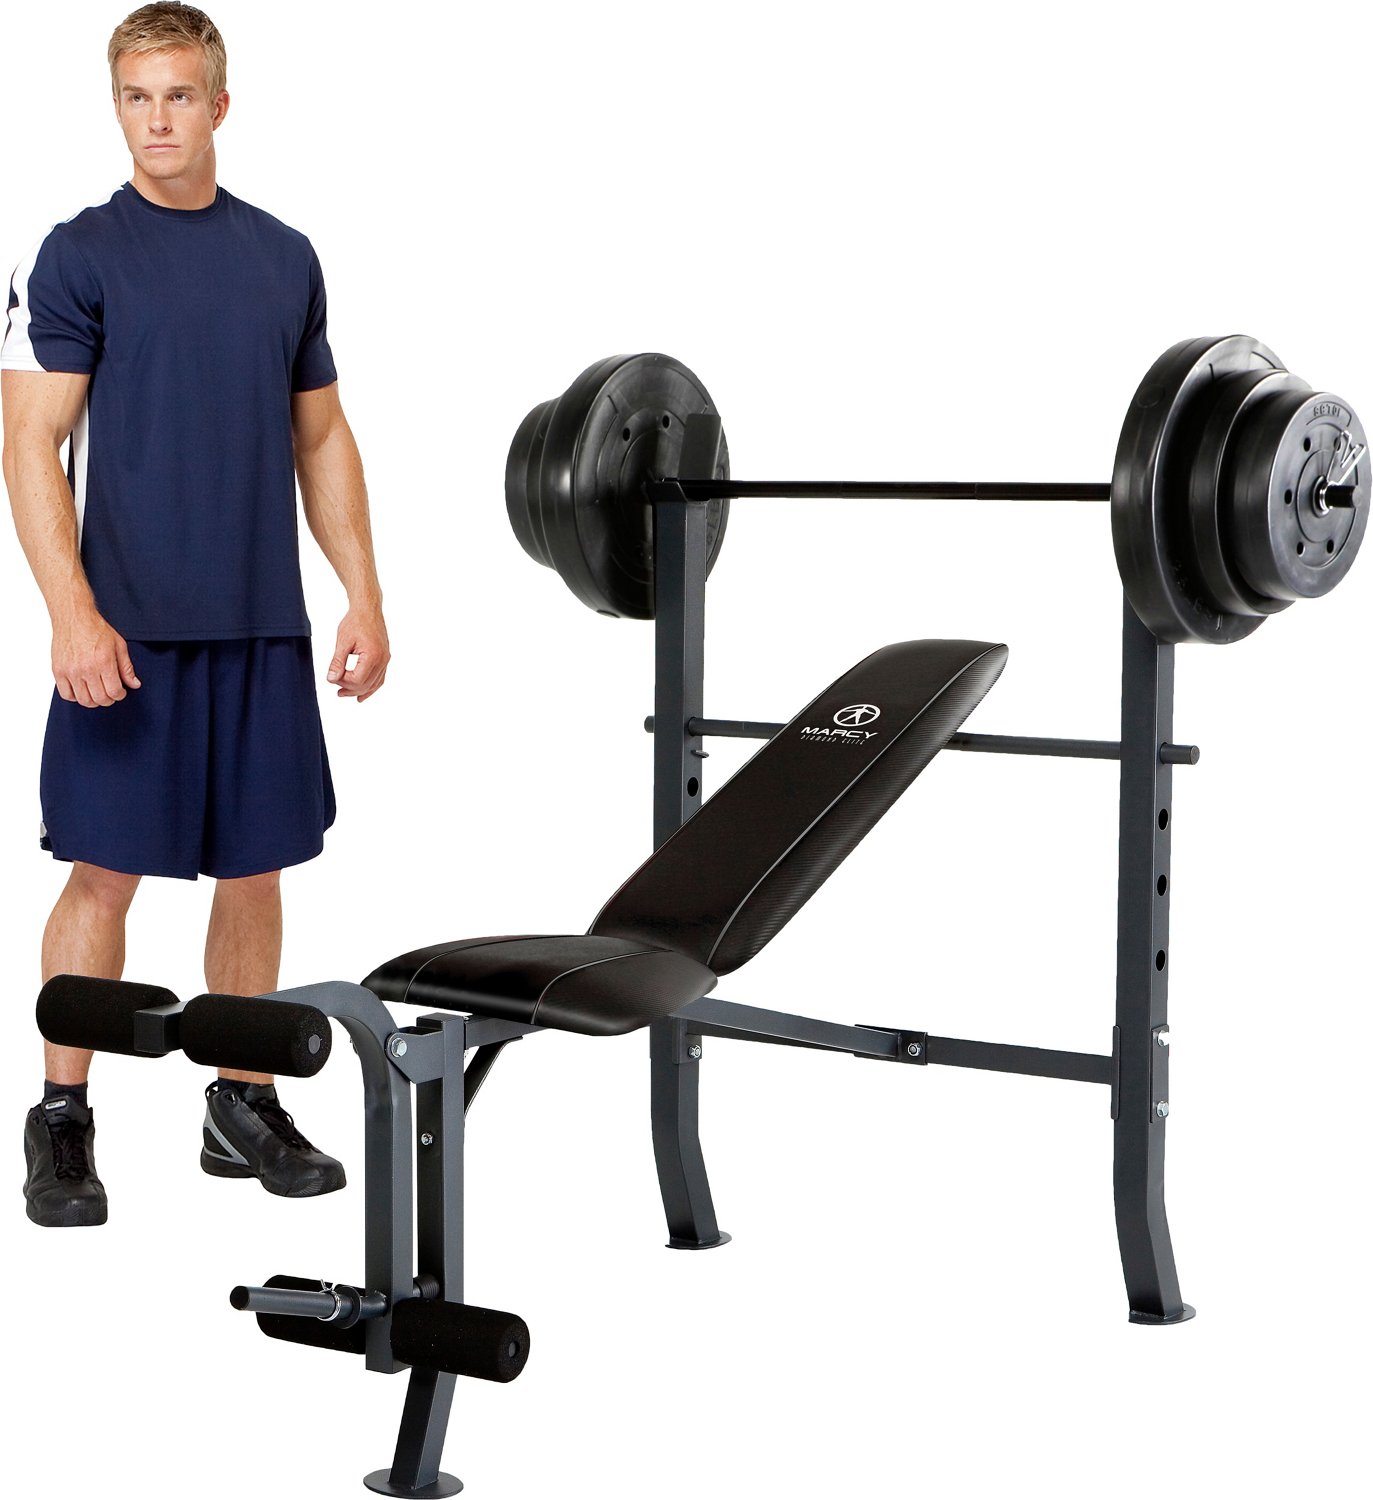 ADJUSTABLE LIFTING WEIGHT BENCH SET Weight Bench Barbell Lifting Press Gym 